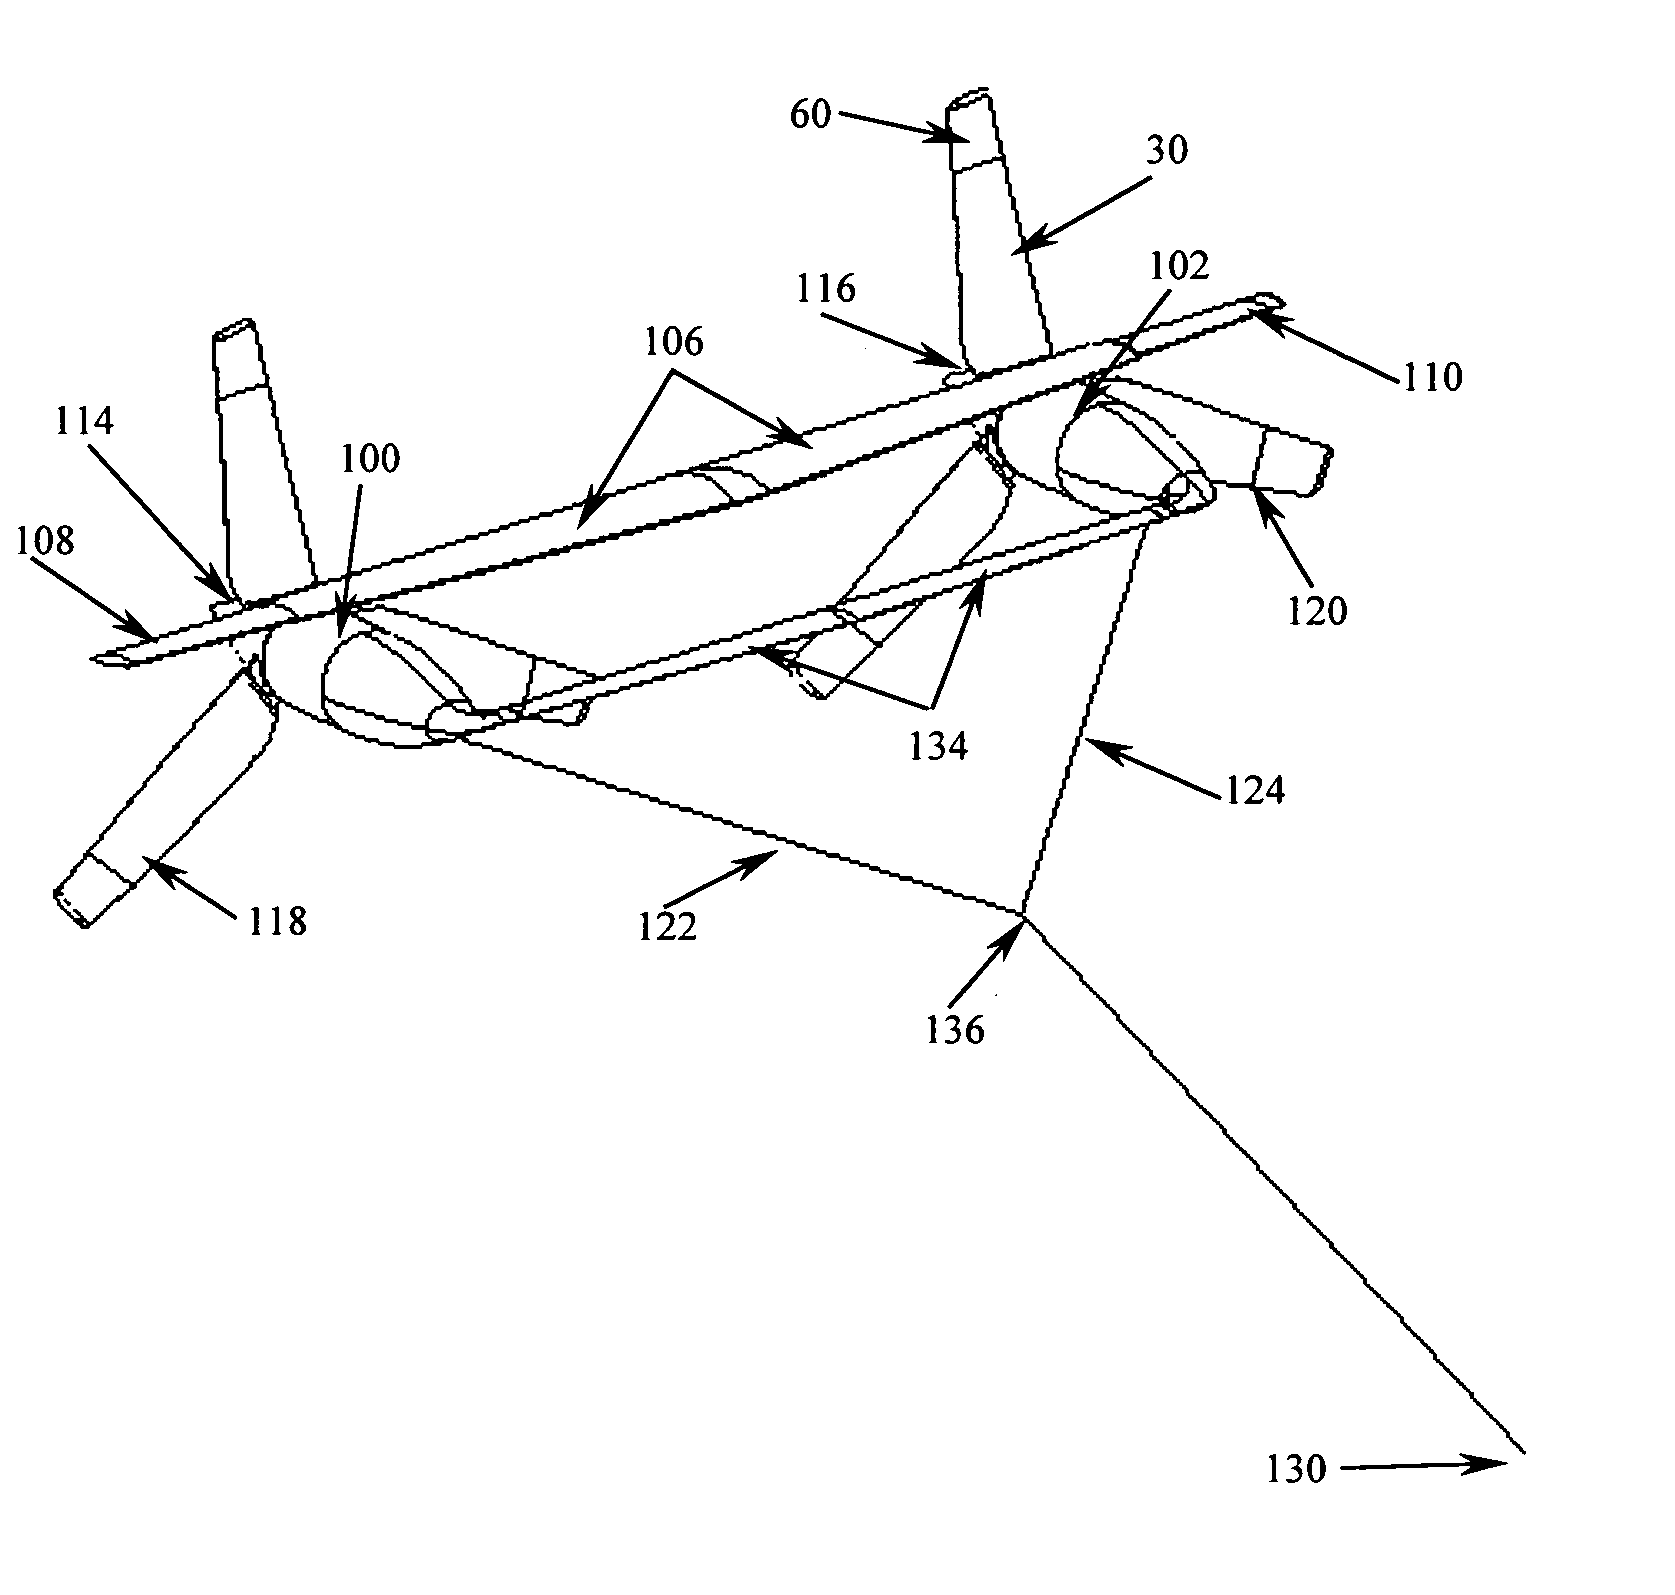 Mechanism for extendable rotor blades for power generating wind and ocean current turbines and means for counter-balancing the extendable rotor blade